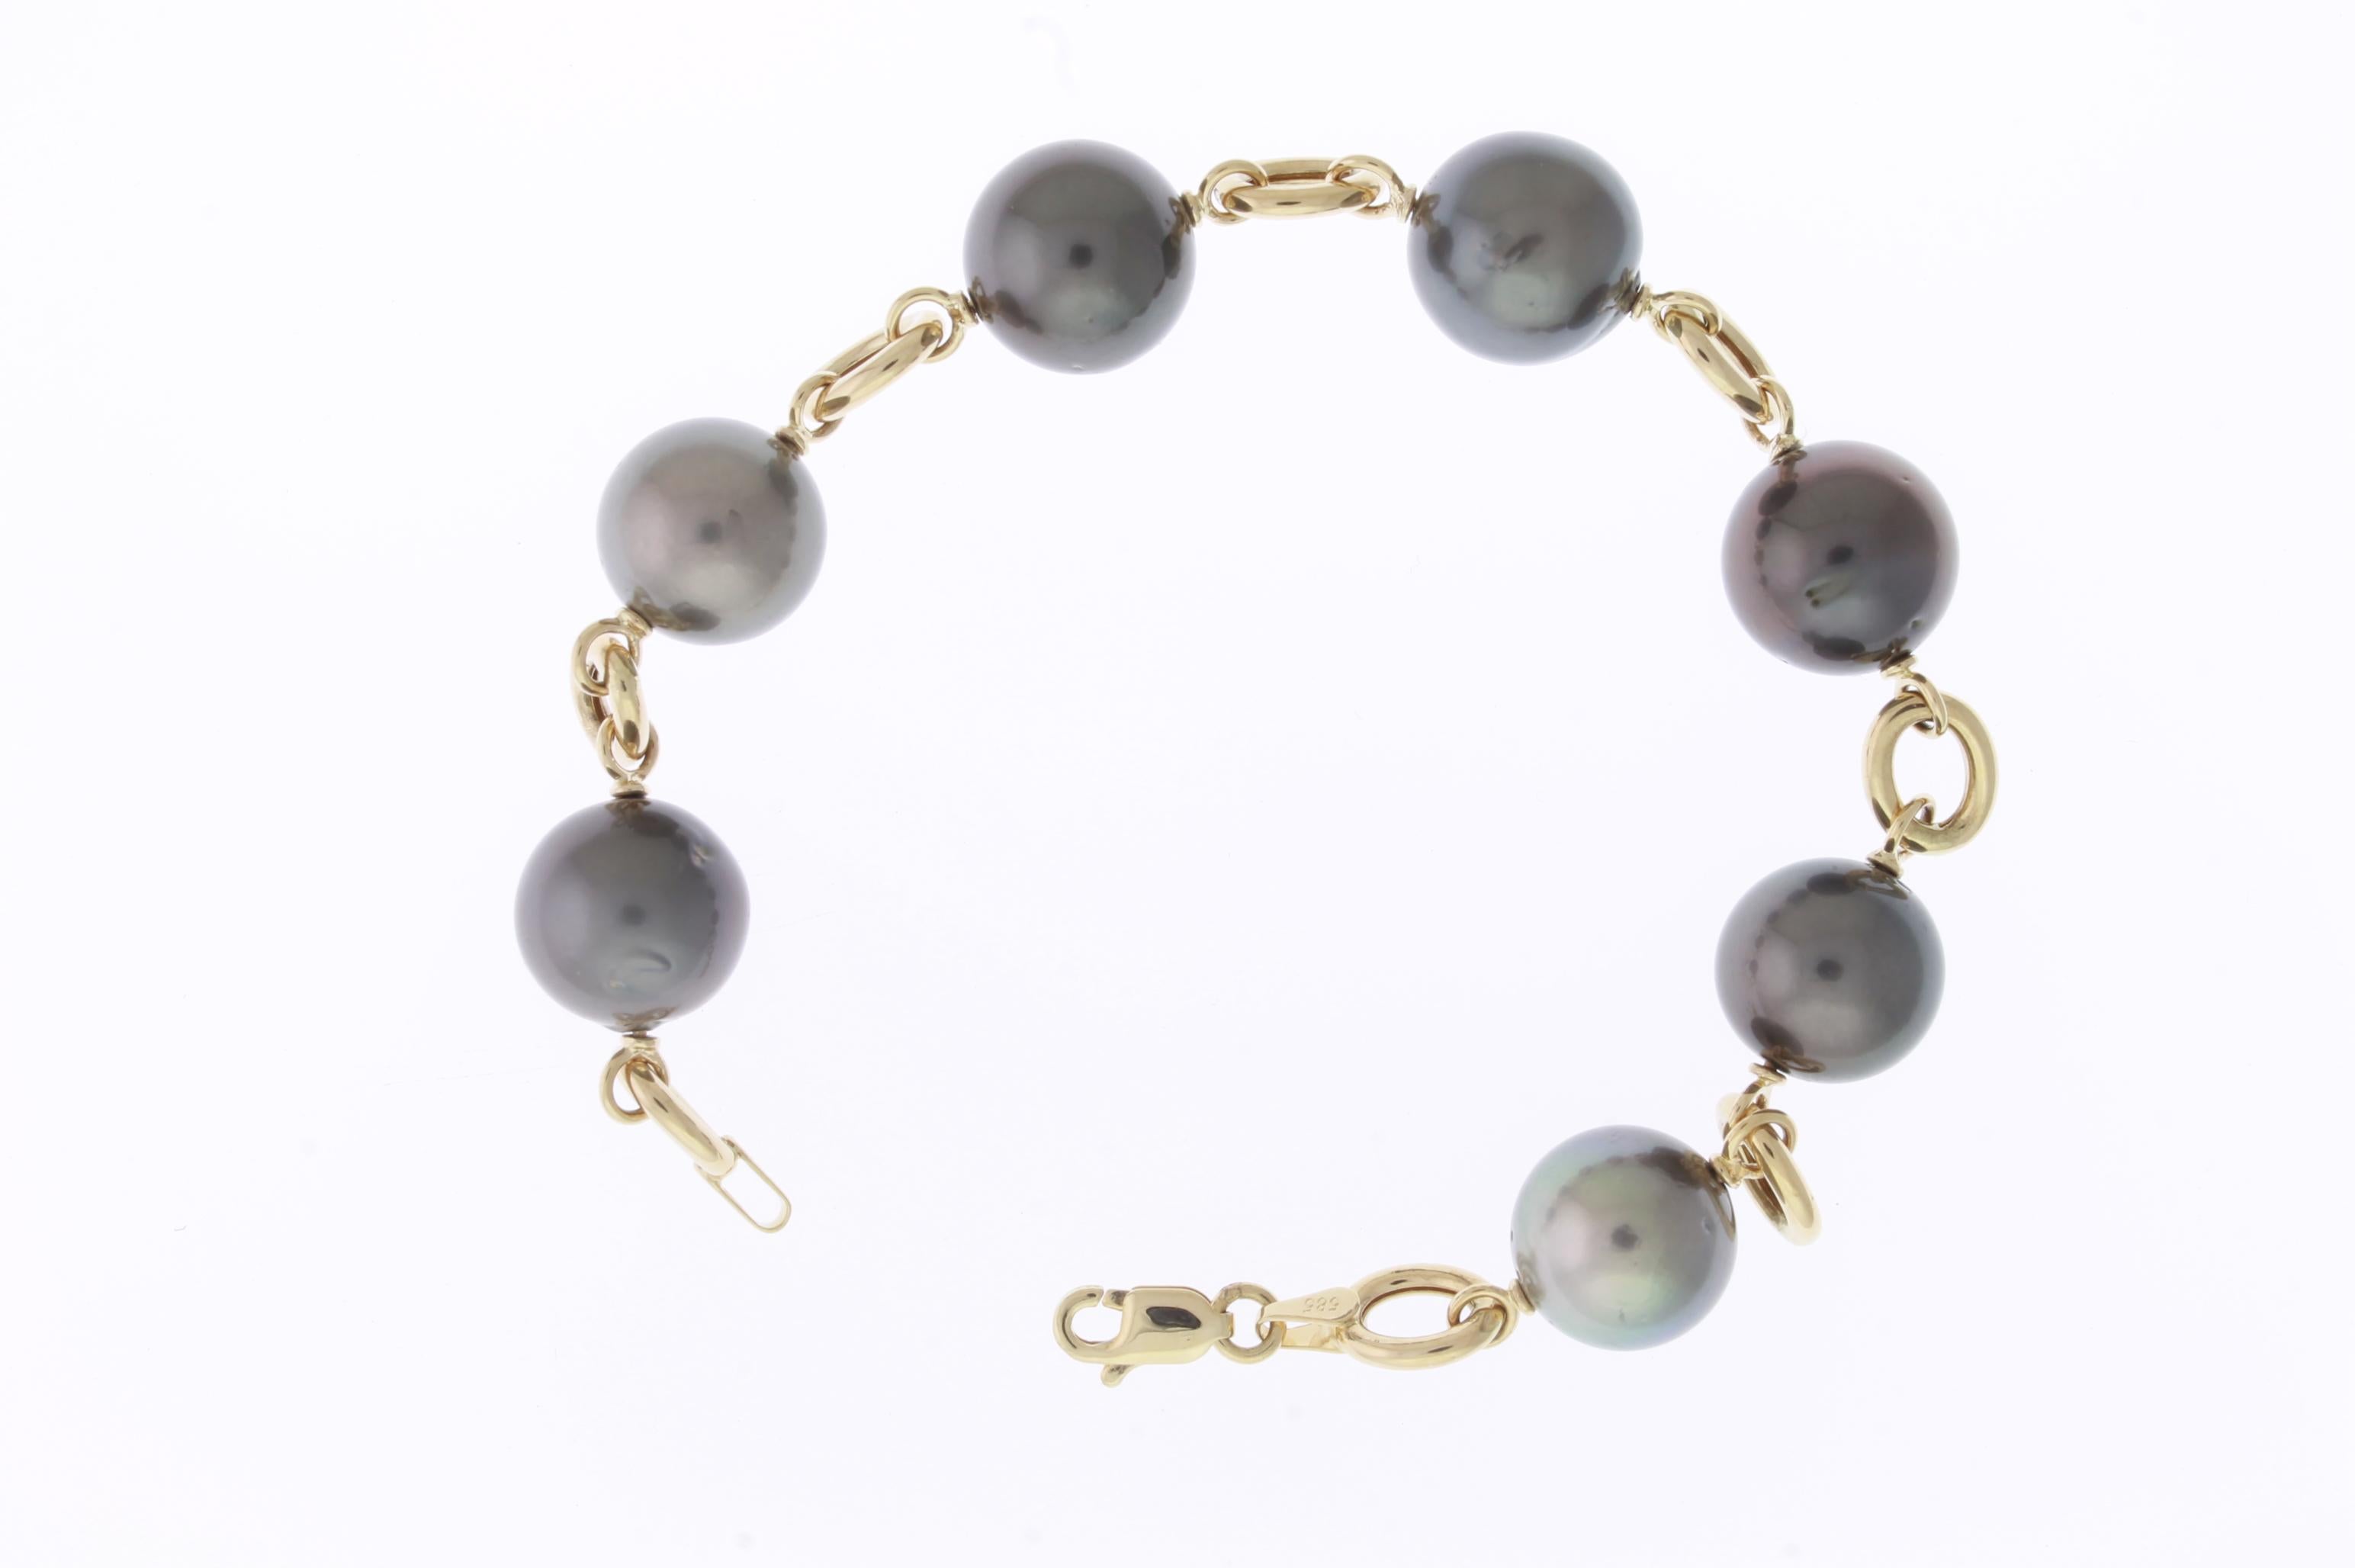 Material: 14K Yellow Gold 
Stone Details: 7 Tahitian South Sea Pearls - 12mm Each

Fine one-of-a-kind craftsmanship meets incredible quality in this breathtaking piece of jewelry.

All Alberto pieces are made in the U.S.A and include a lifetime